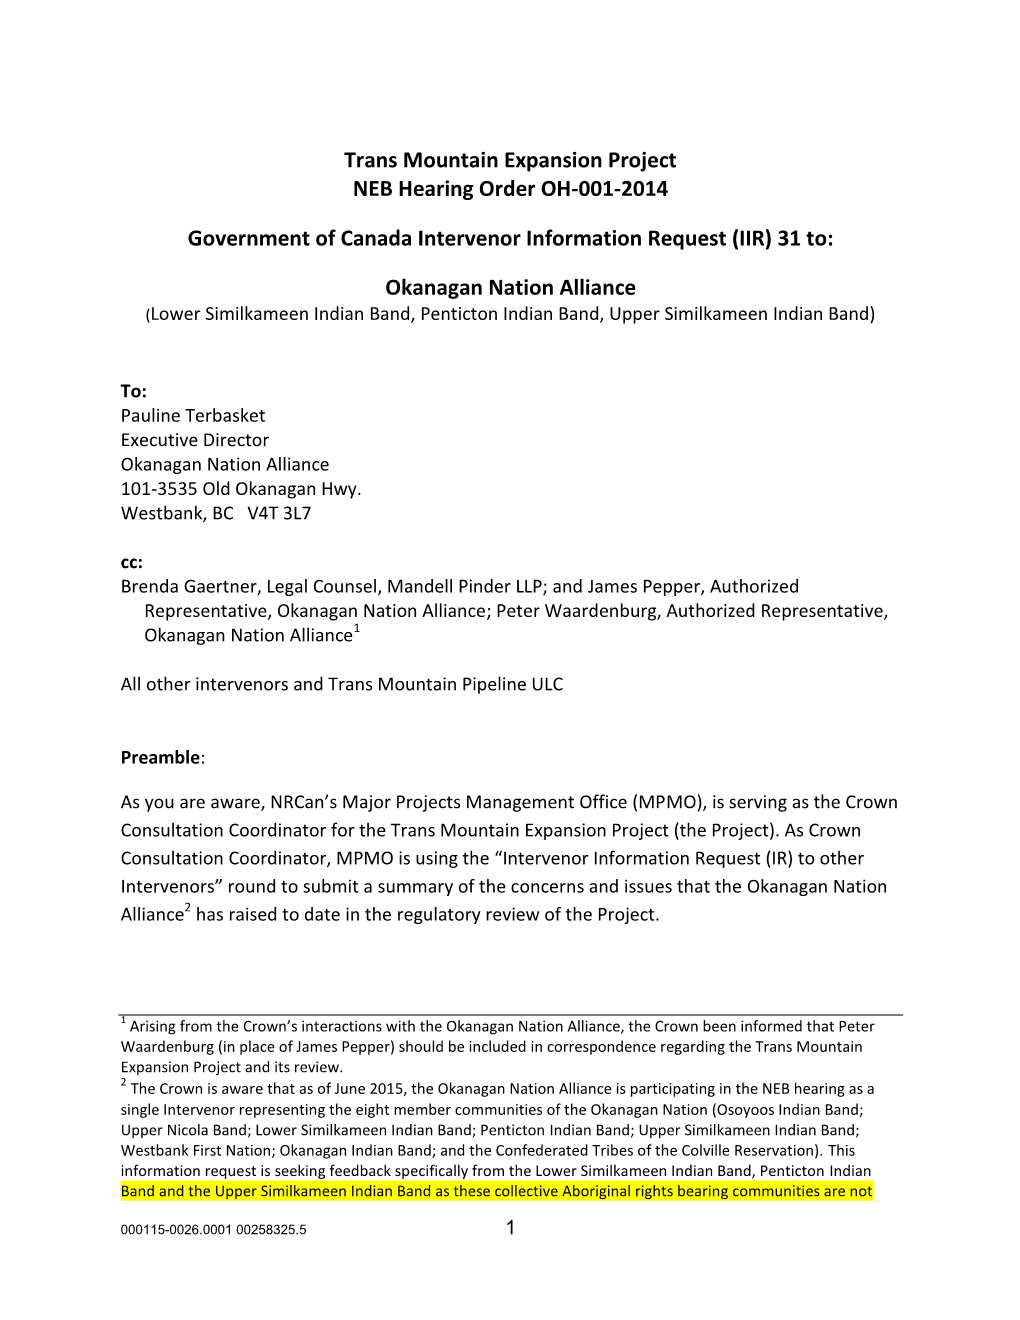 Trans Mountain Expansion Project NEB Hearing Order OH-001-2014